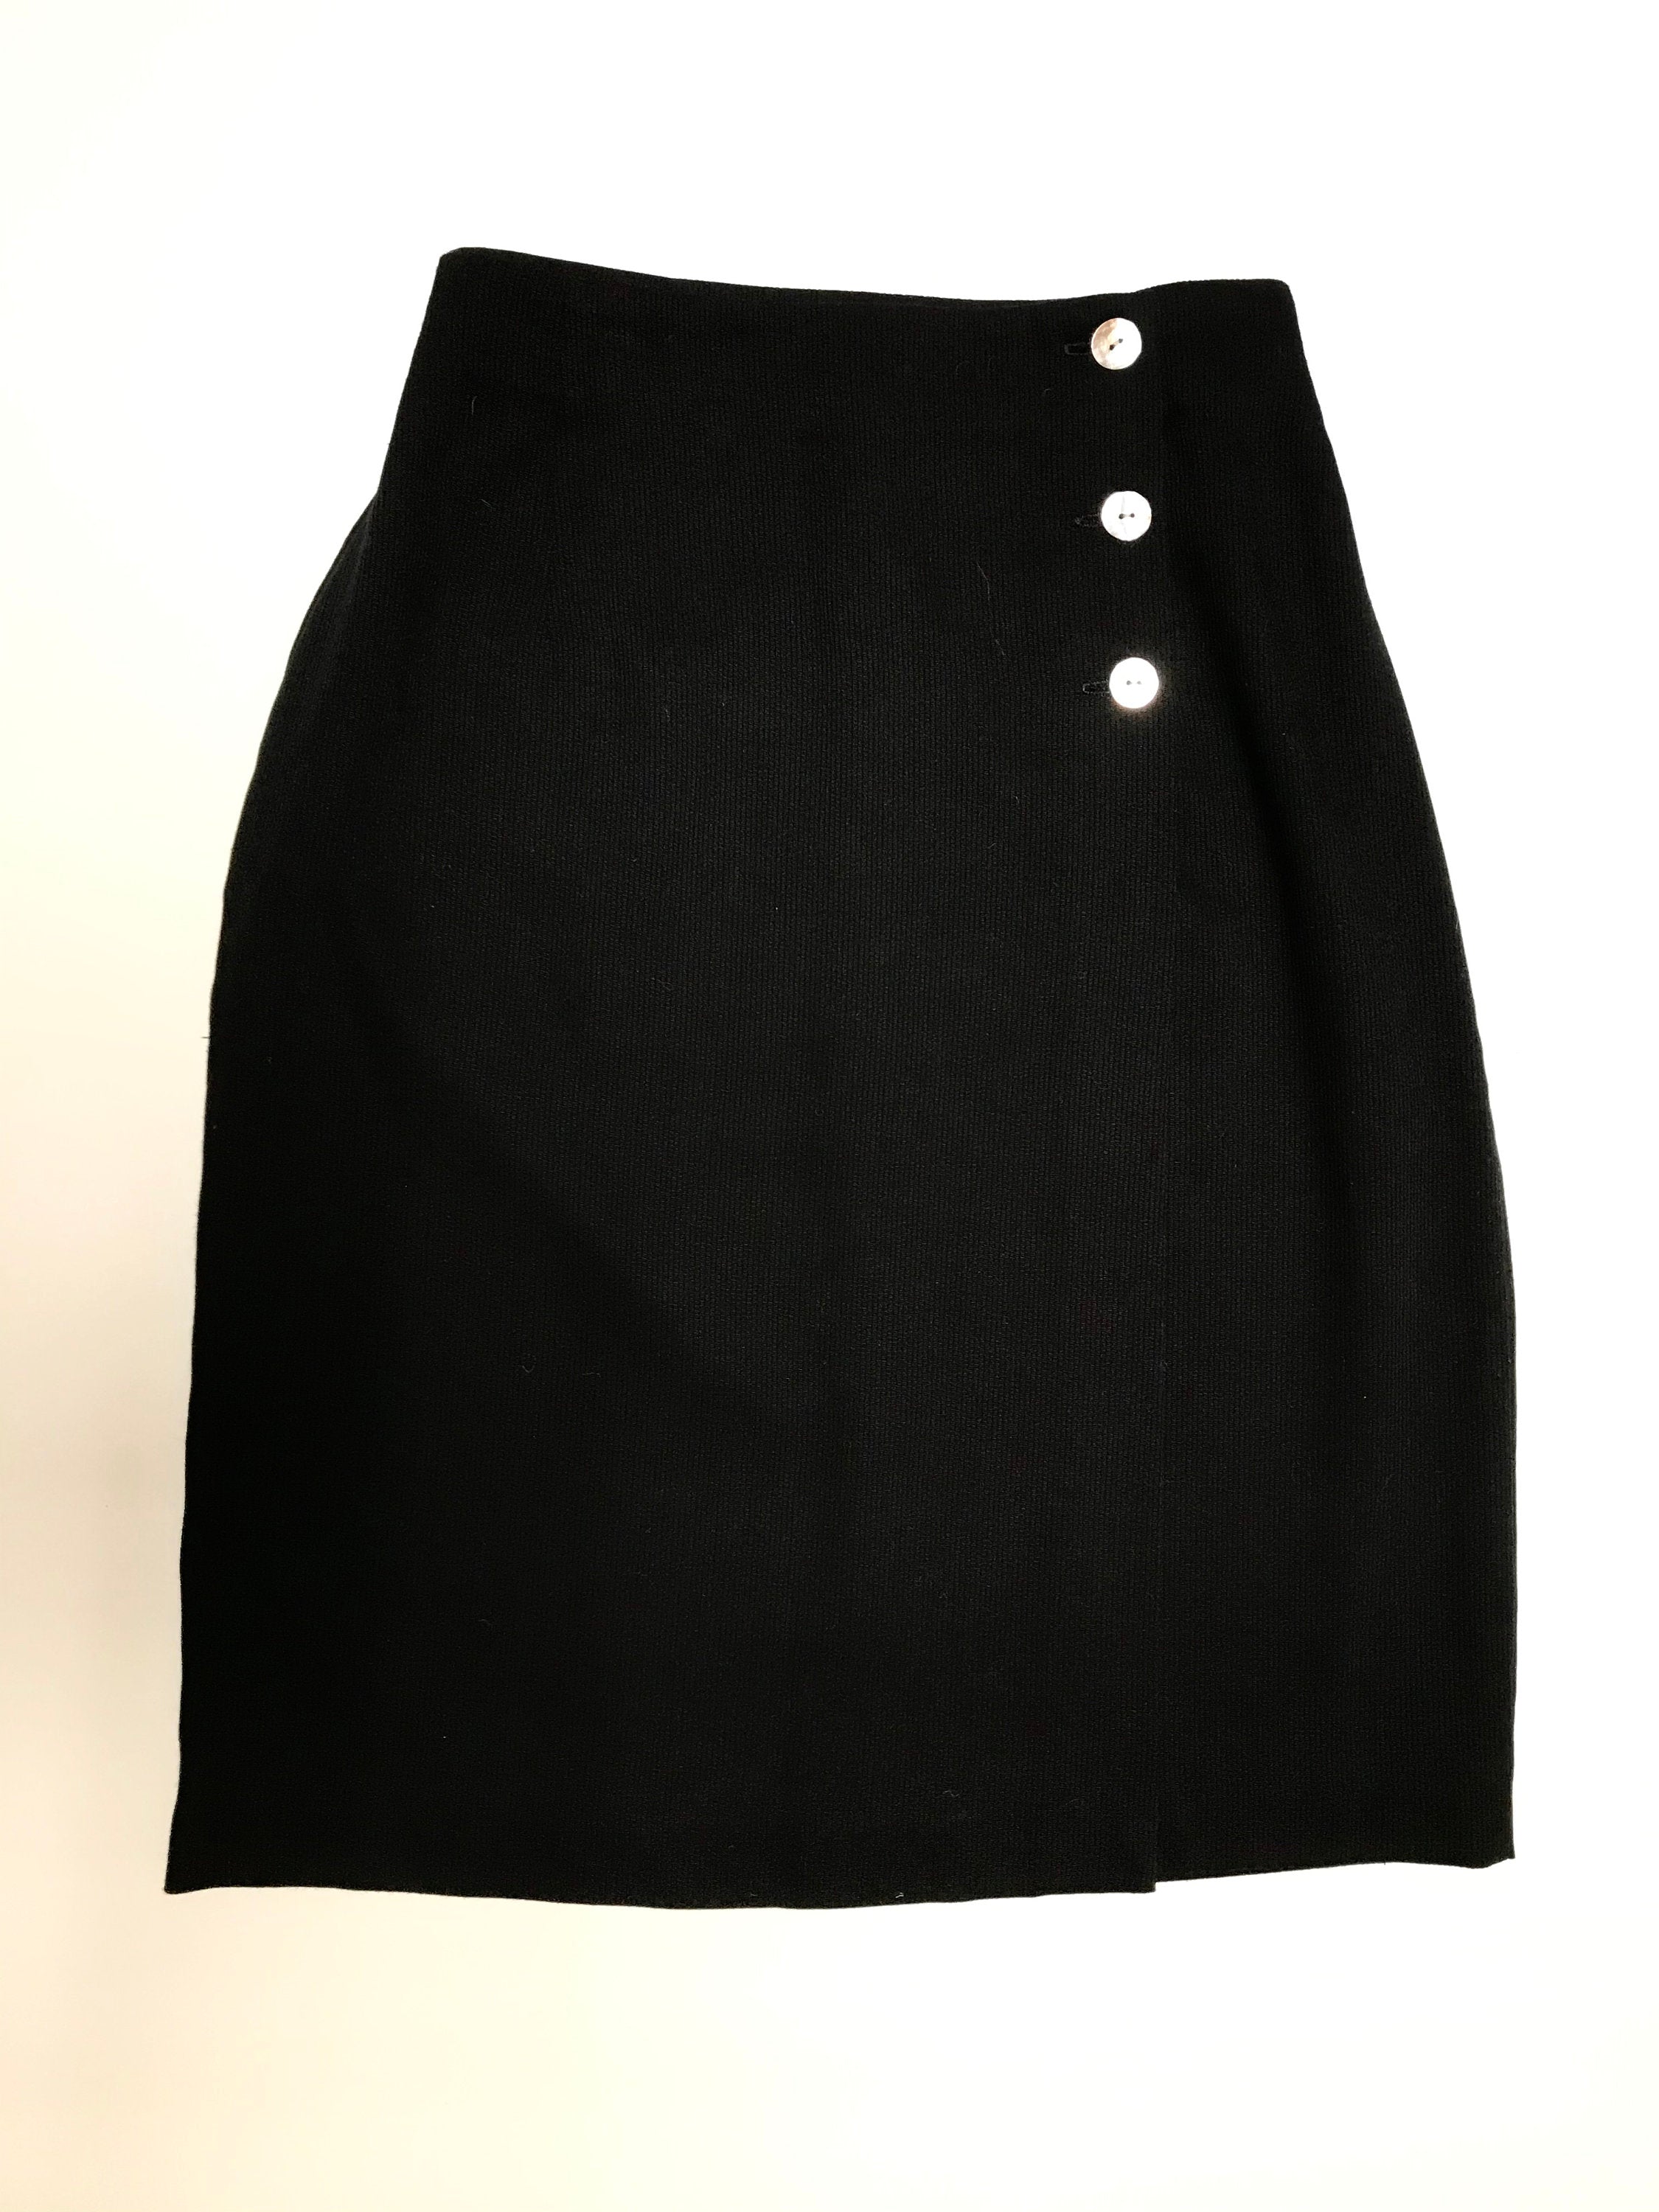 Vintage 80's/90's Black Wrap Skirt with Shell Buttons by Worthington ...